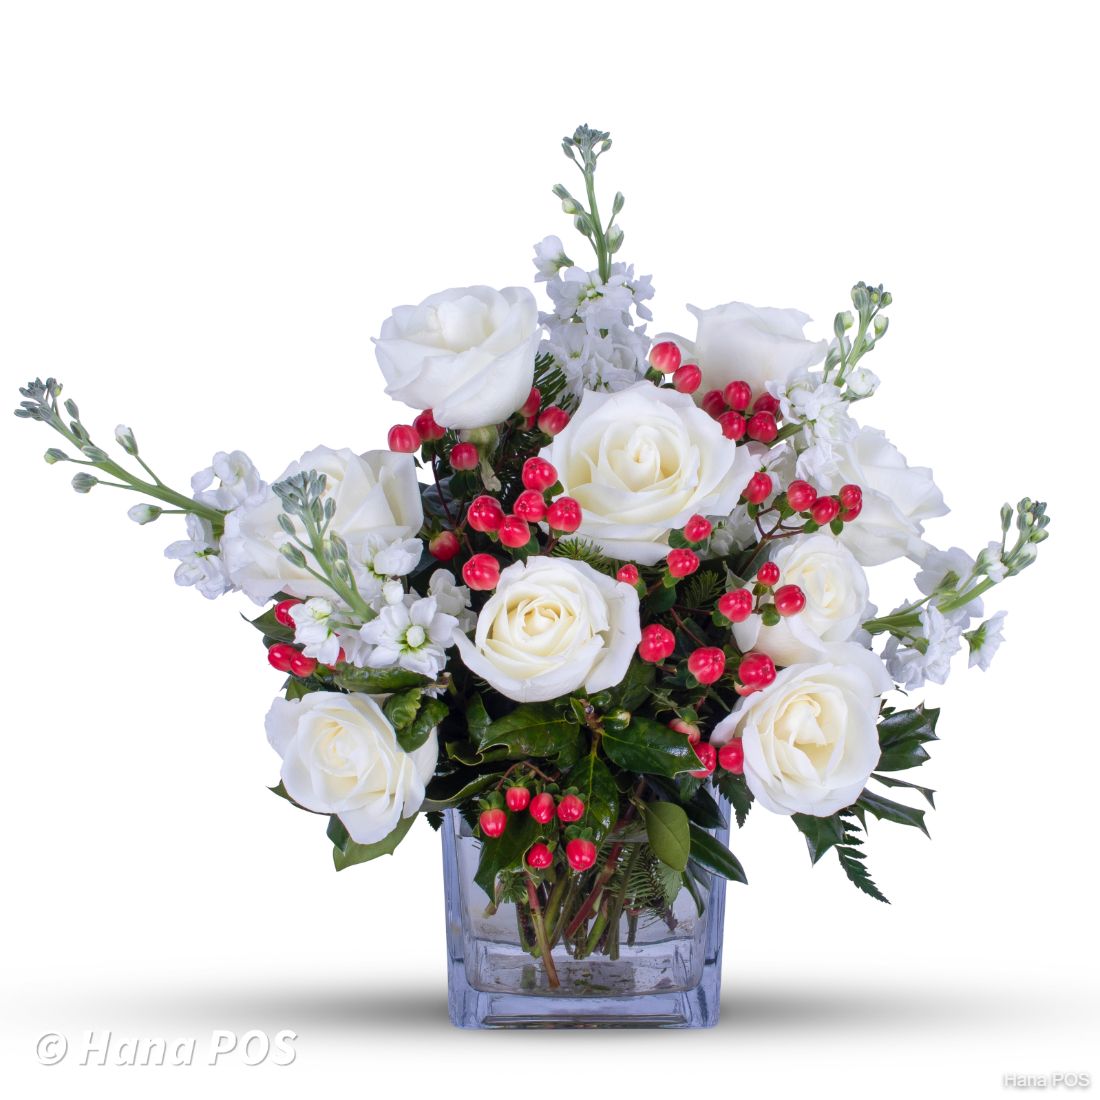 Christmas Wish Flower Delivery Fort Wayne IN - Cottage Flowers Inc